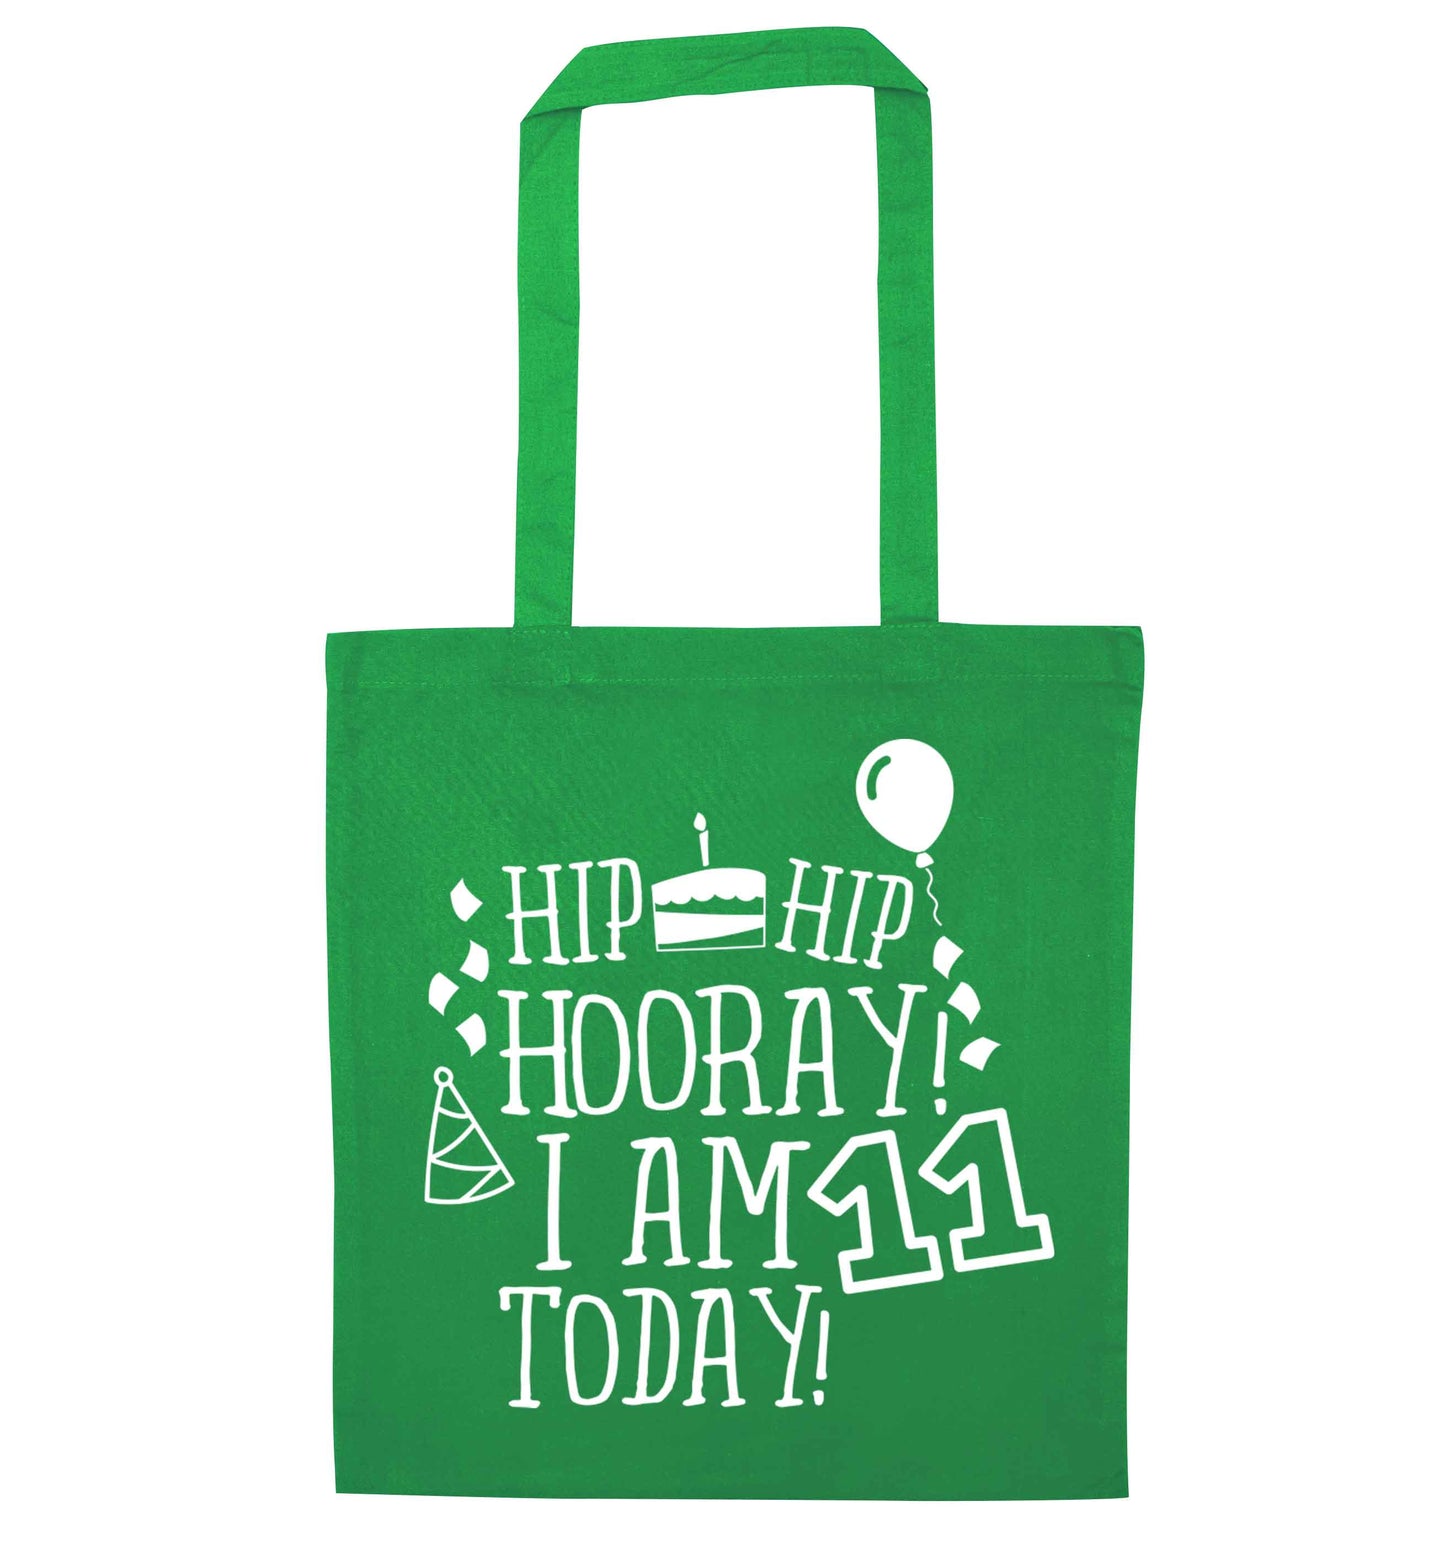 Hip hip hooray I am eleven today! green tote bag